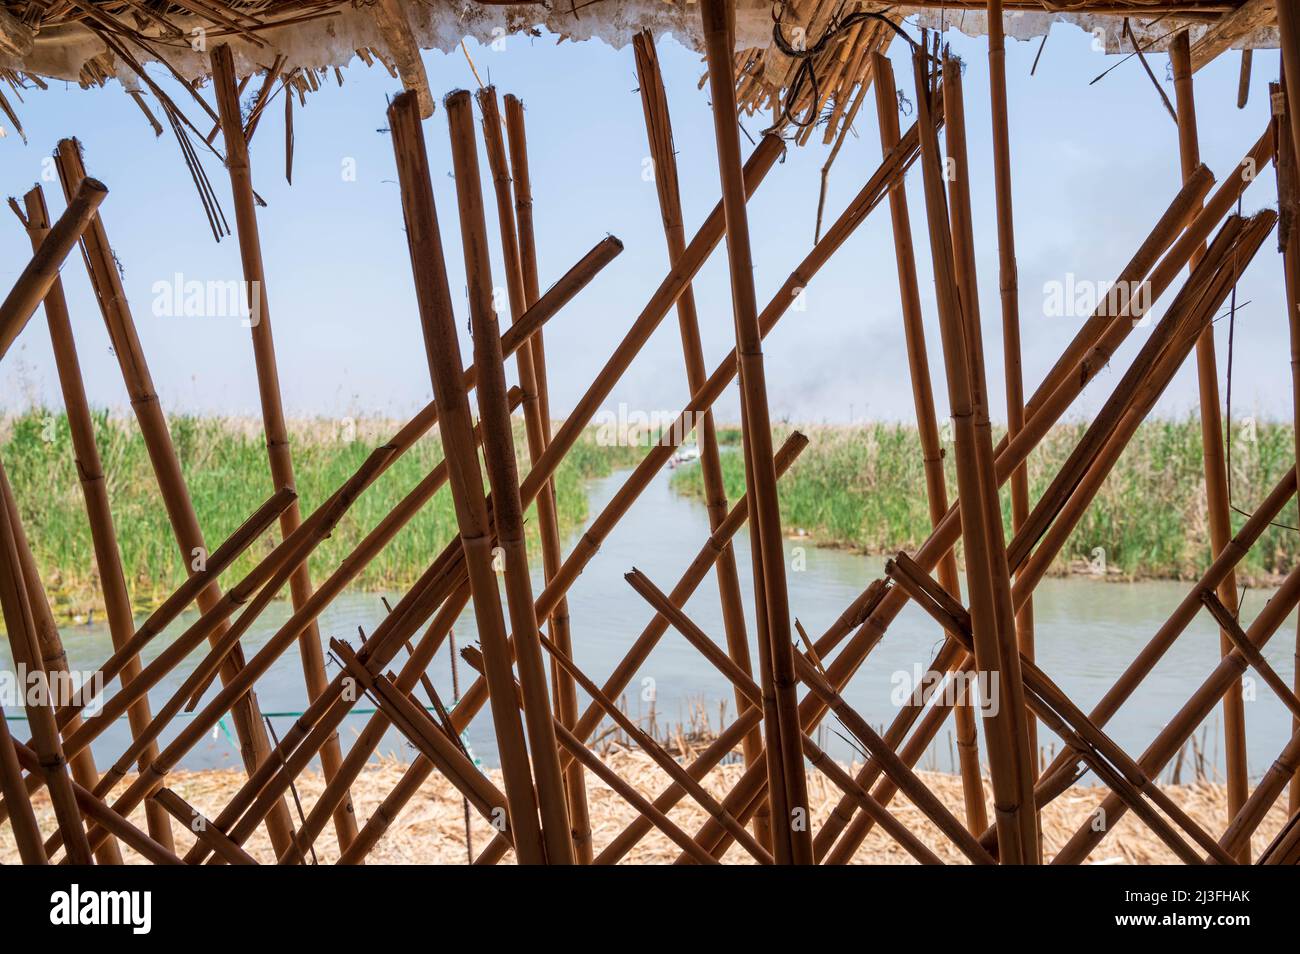 Looking through the reed-built walls of a traditional house in the Chibayish Marsh in southern Iraq Stock Photo